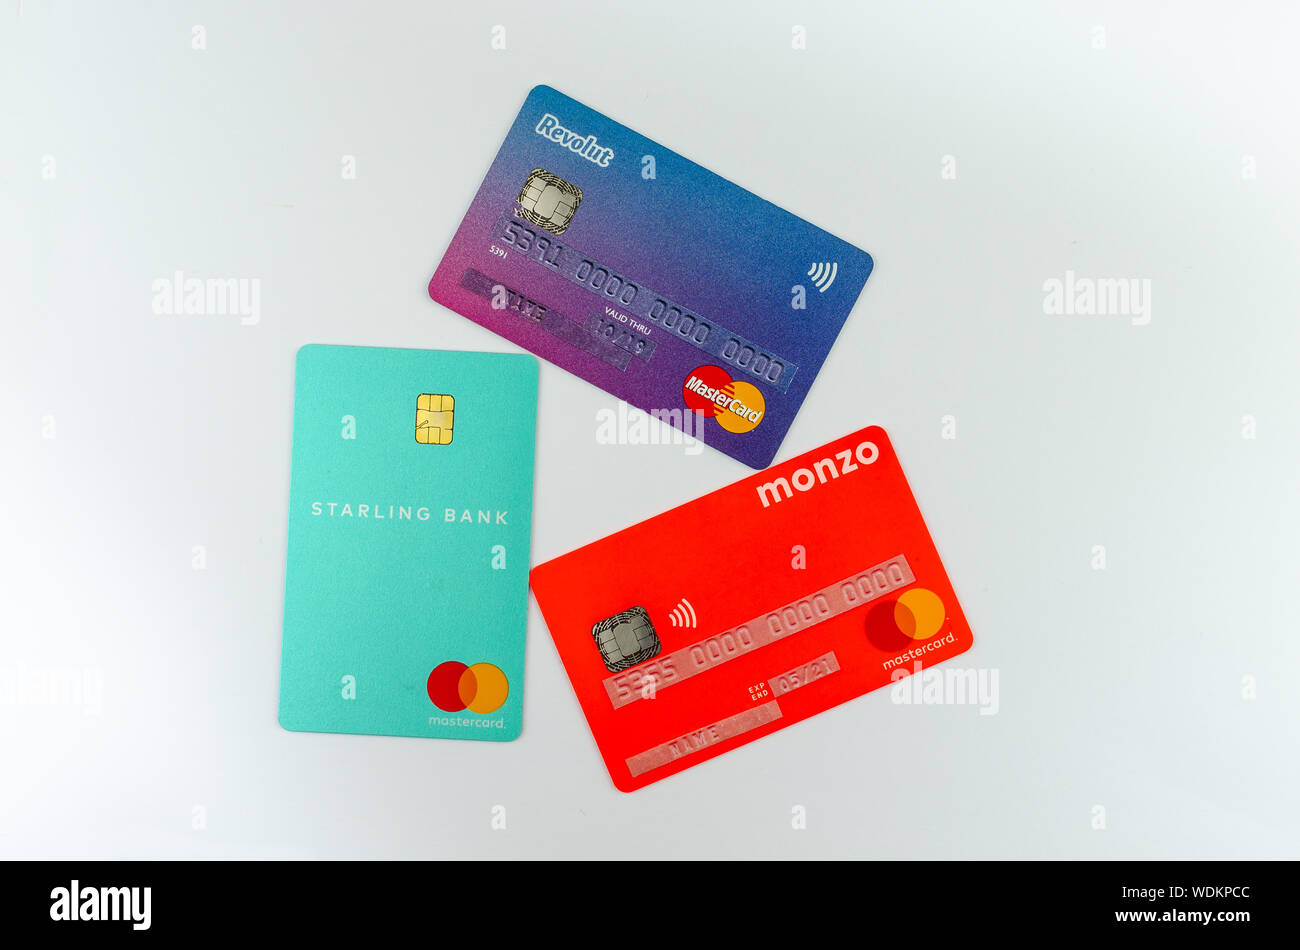 Starling, Monzo, Revolut bank cards placed next to each other. Concept for competition. The sensitive info is covered with stickers with dummy digits. Stock Photo